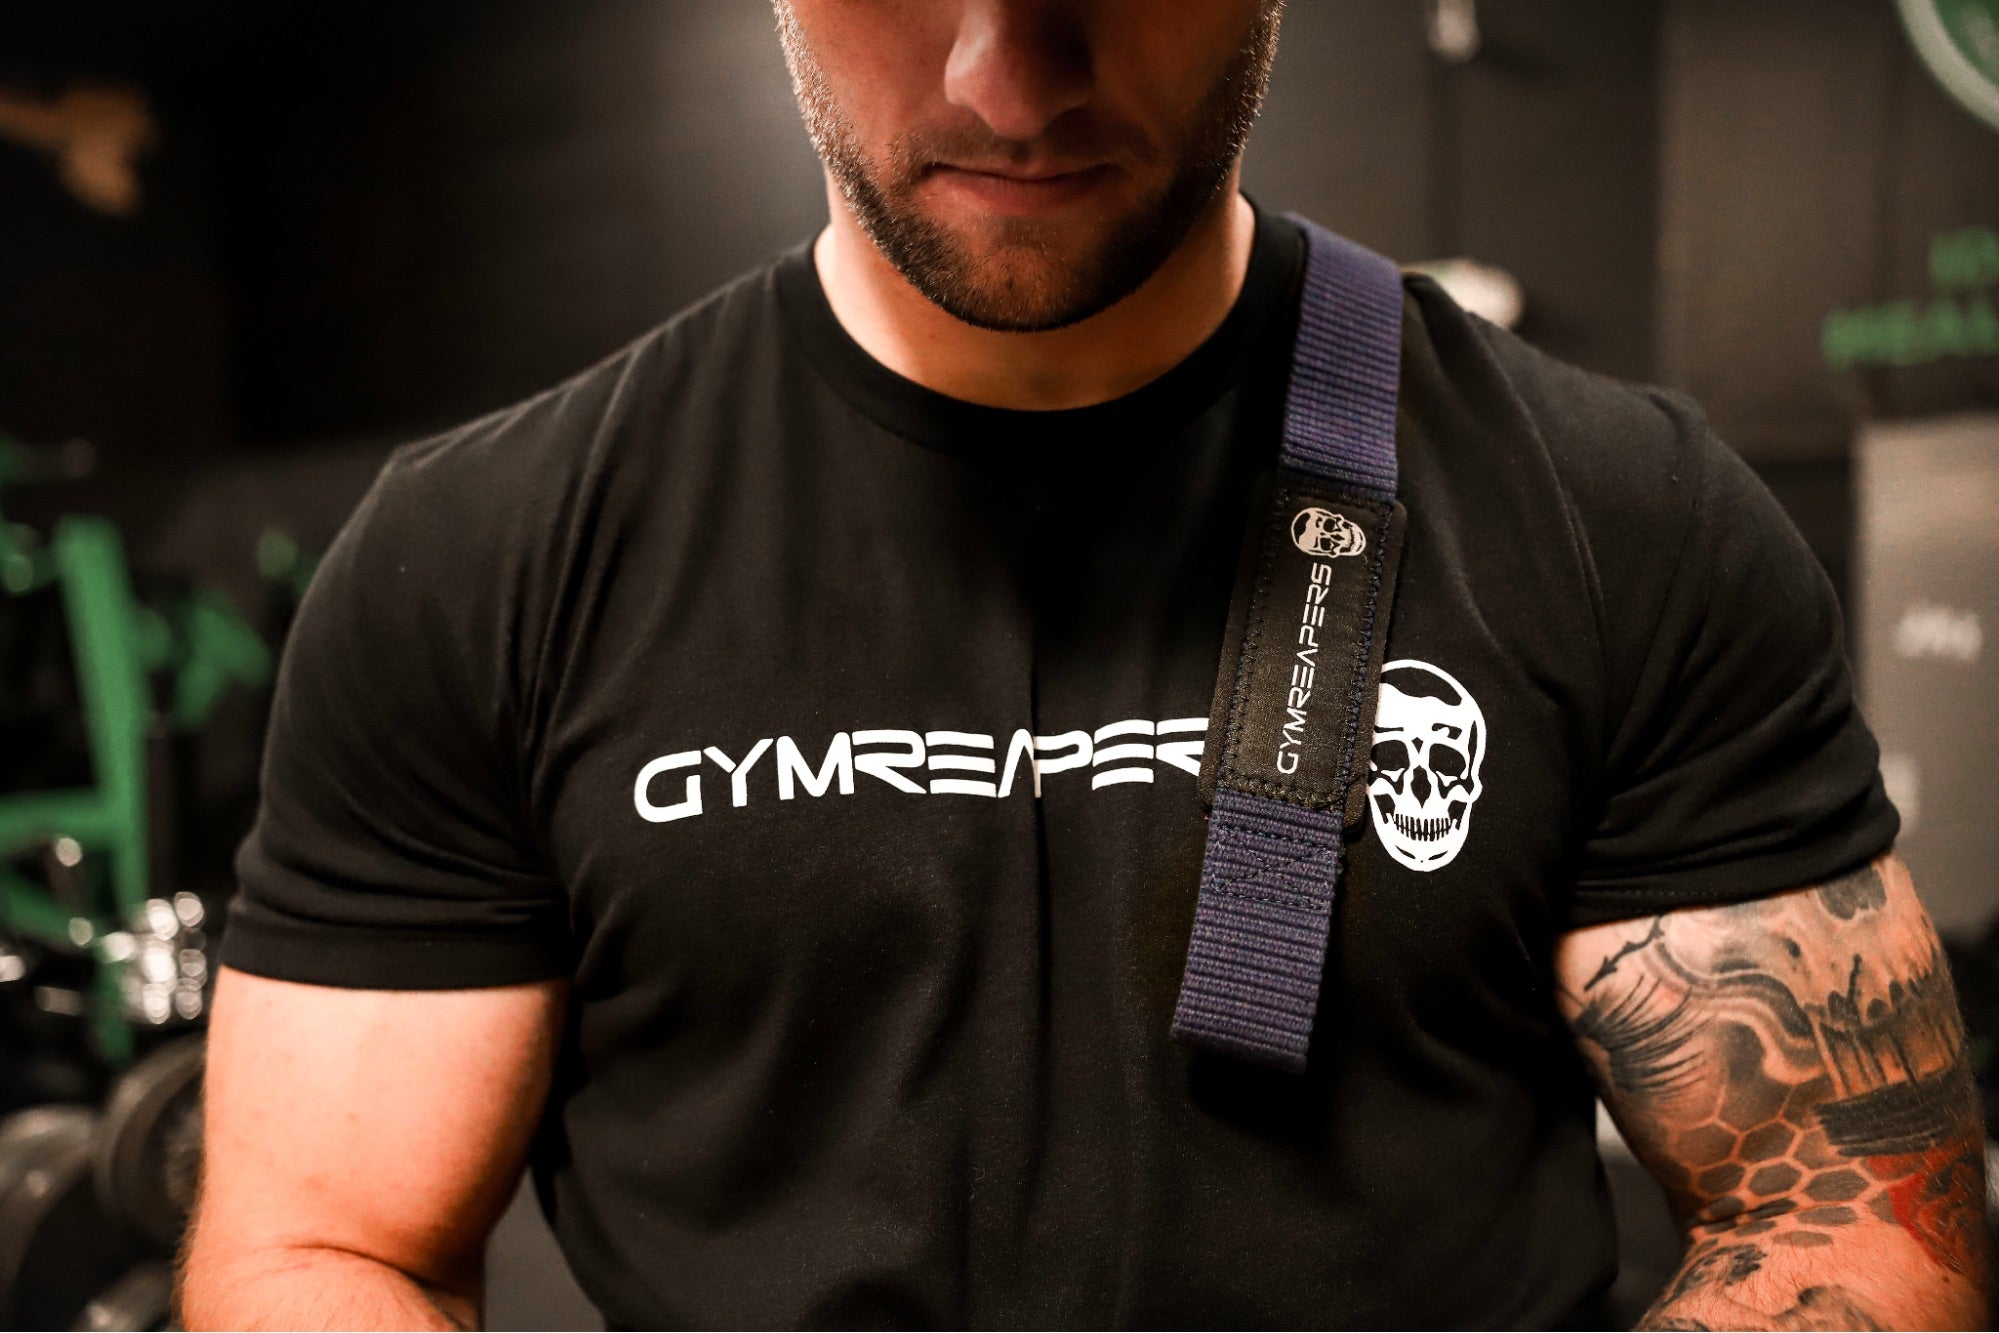 A model wearing a Gymreapers tshirt.